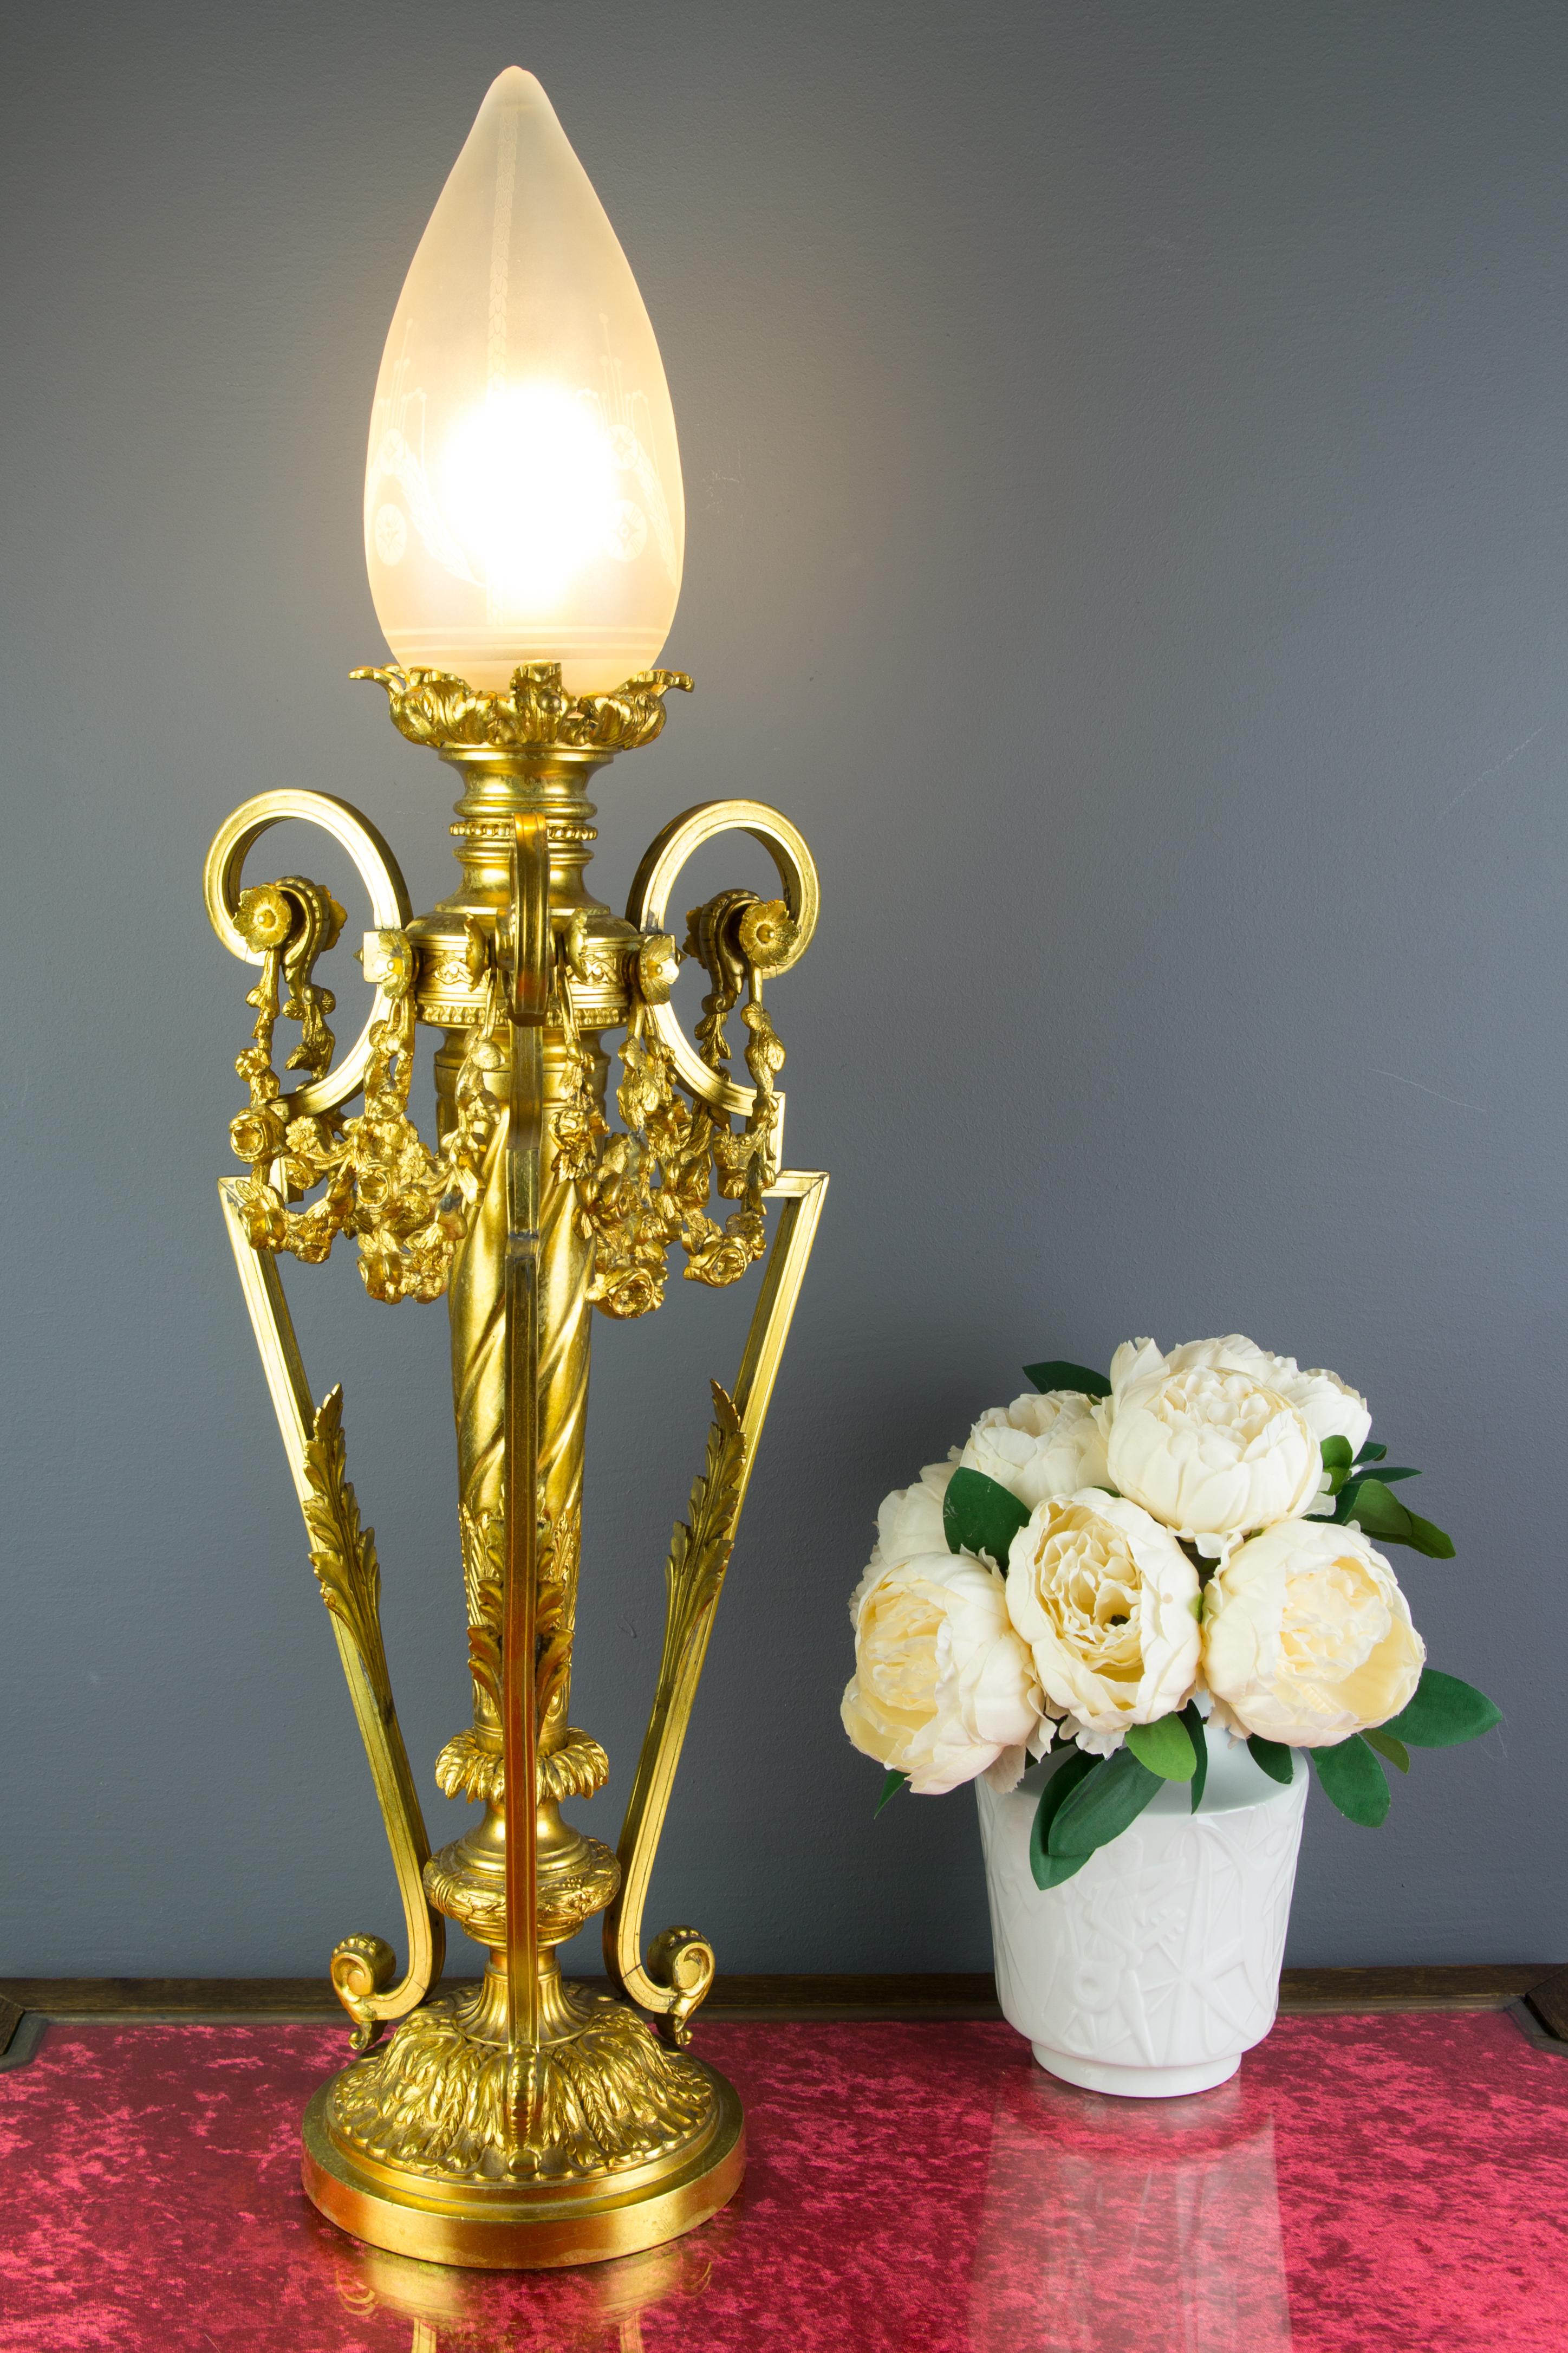 French Louis XVI style gilt bronze newel post lamp with frosted glass flame shade and an E27 socket, France, 1920s.
Richly decorated with bronze decors in a form of acanthus leaves and floral garland drapes.
Generally, in very good condition, it